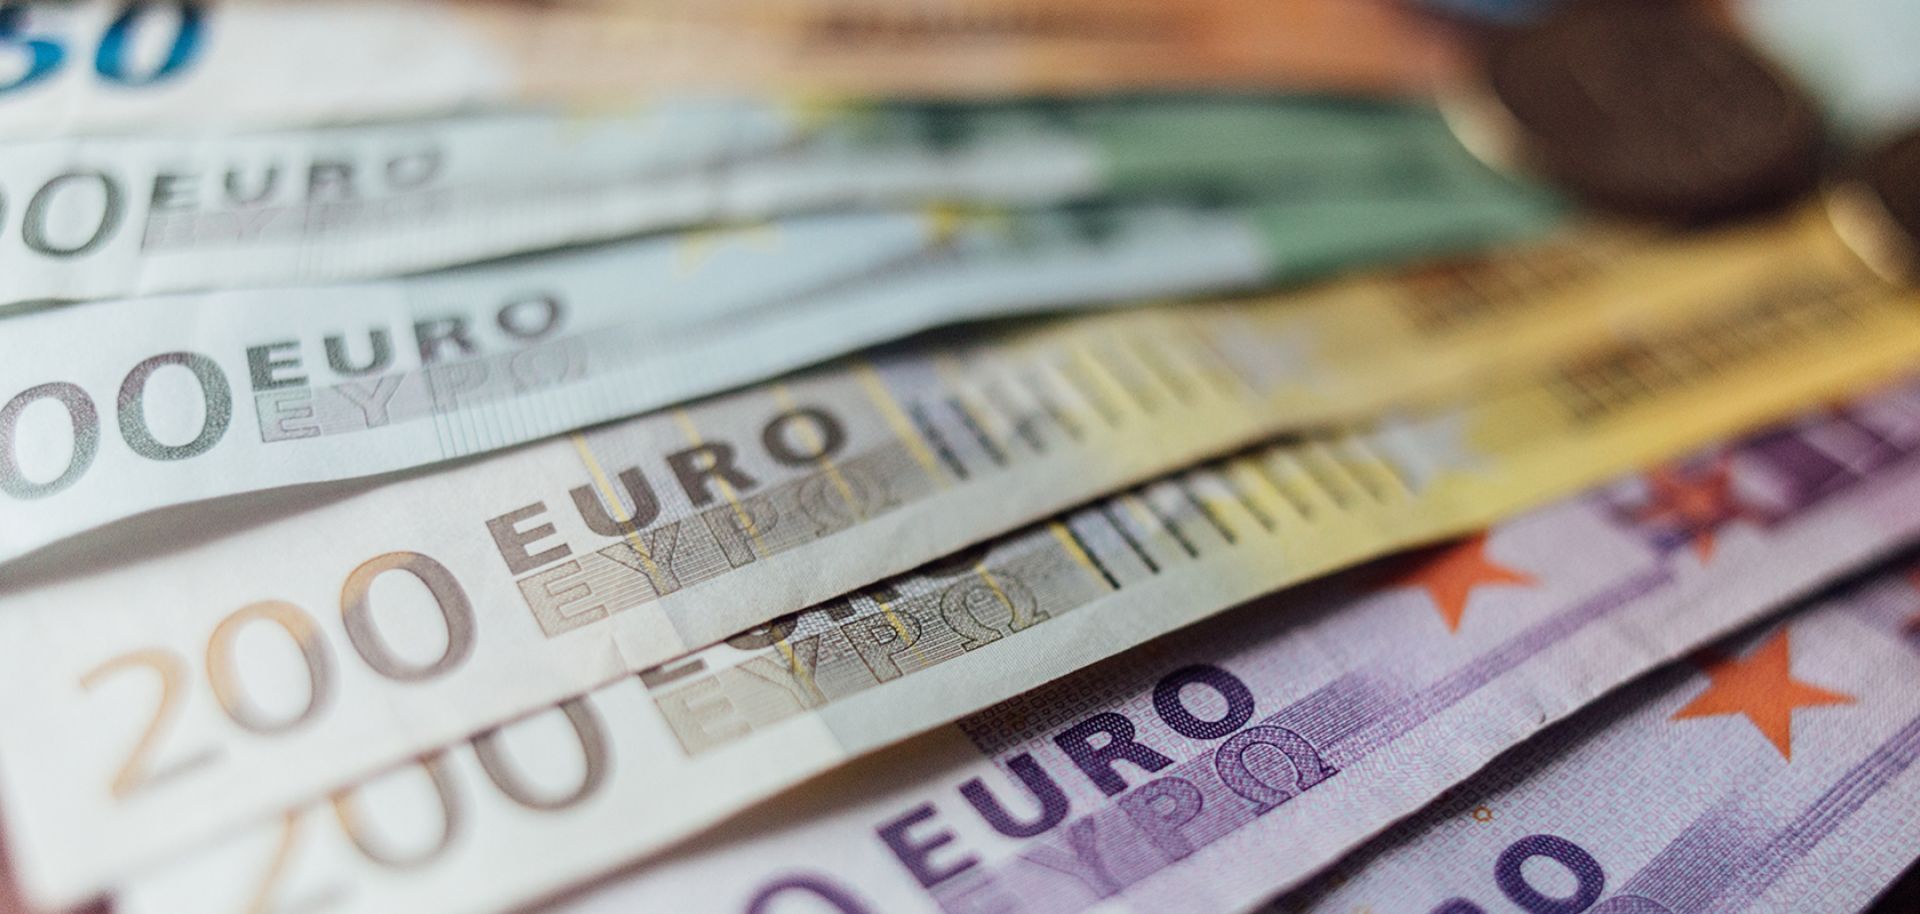 This photo shows fanned-out 50, 100, 200 and 500 banknotes of the euro, the currency of the eurozone.